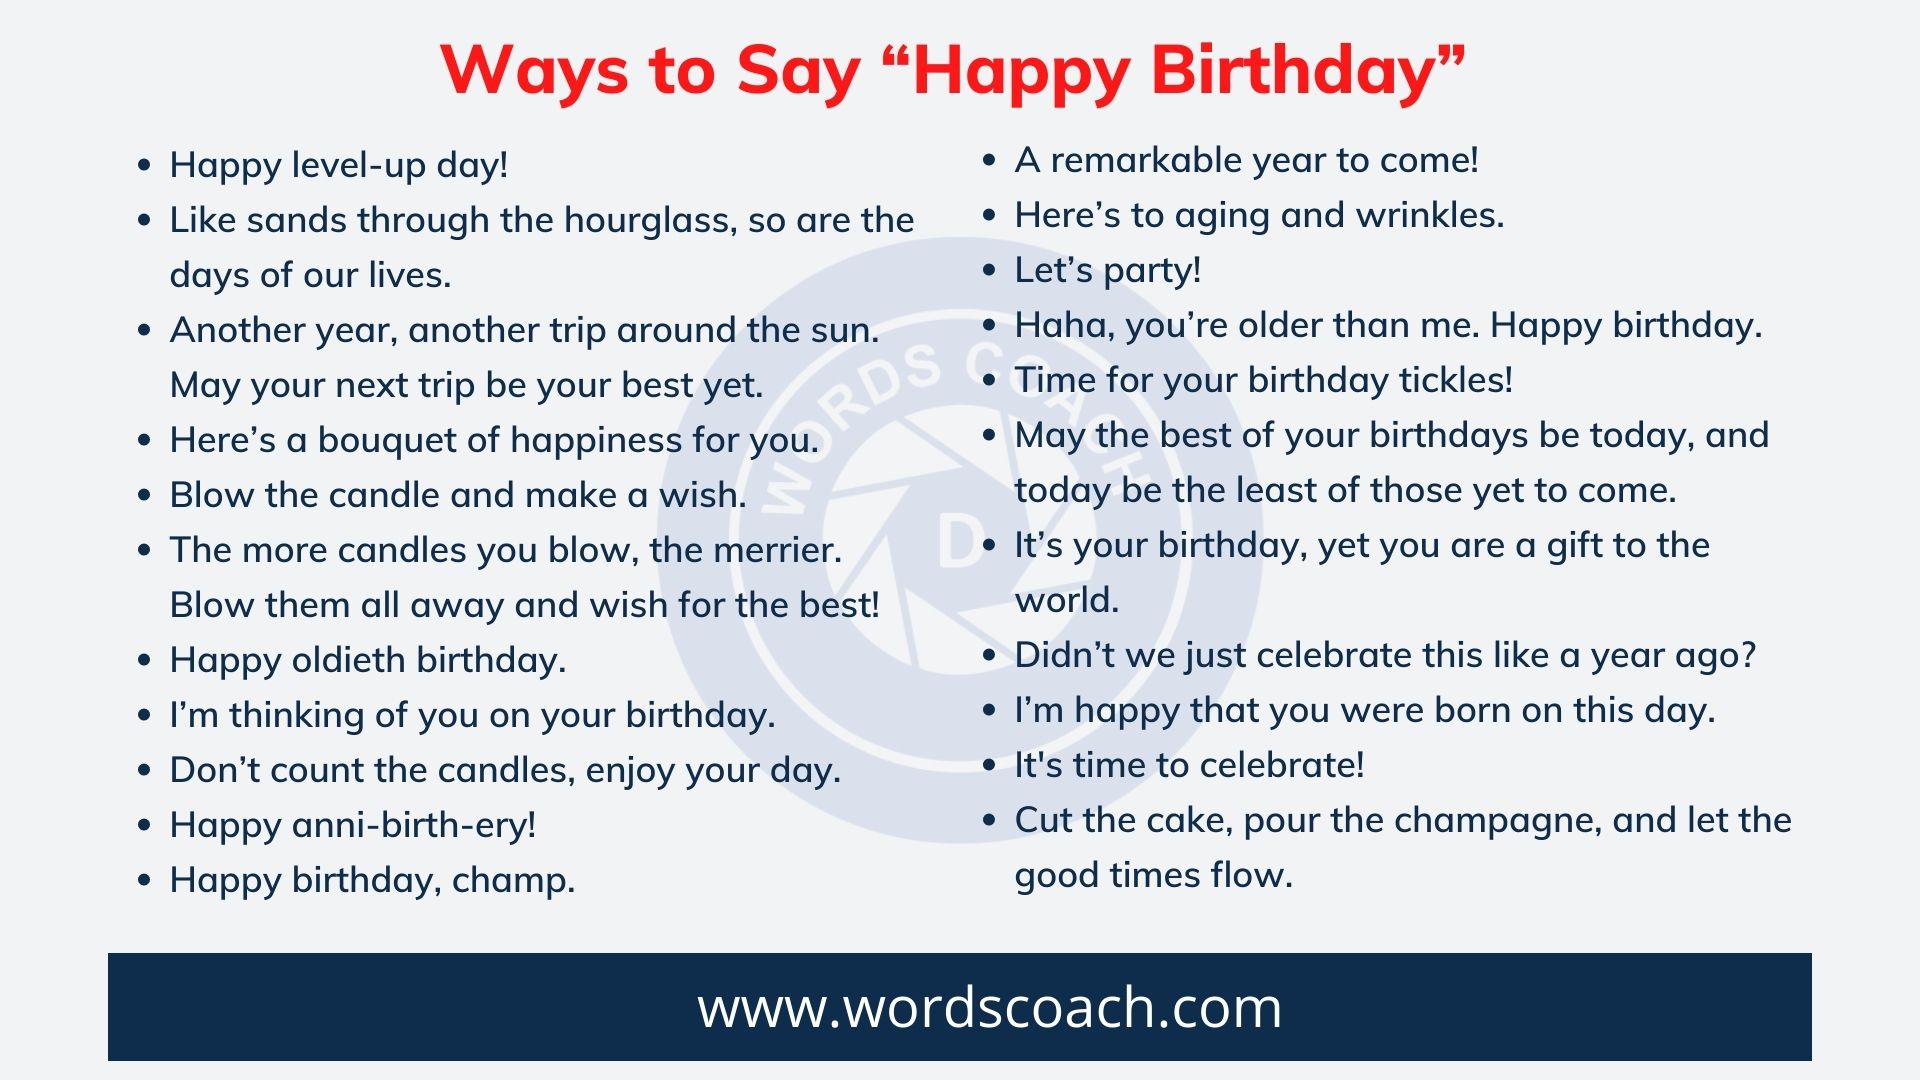 New and Different Ways to Say “Happy Birthday”